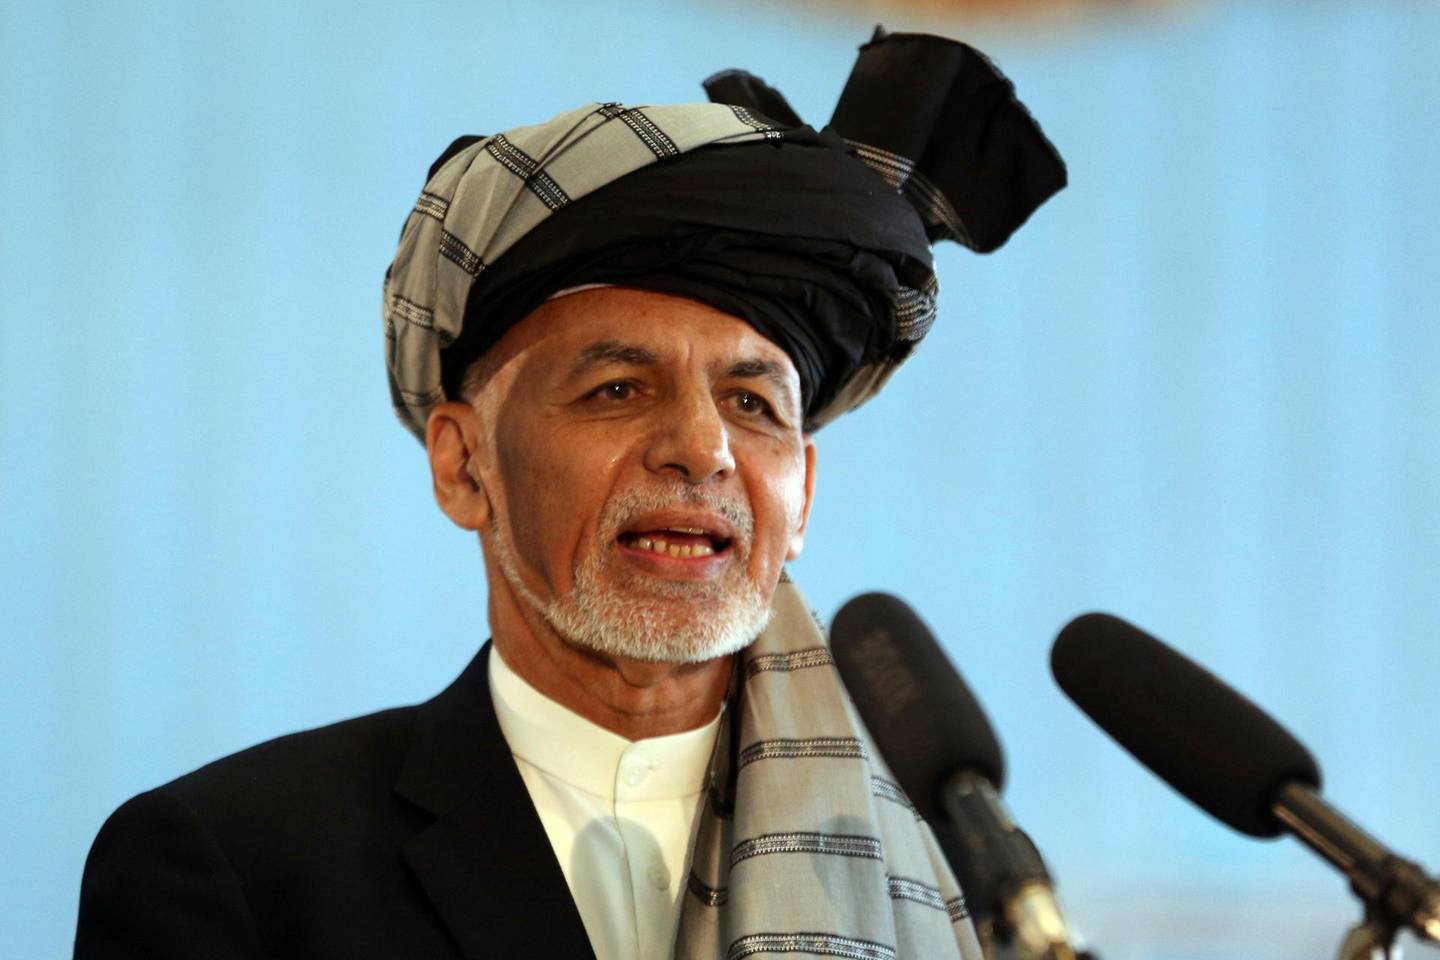 FILE - In this Sept. 28, 2019, file photo, Afghan President Ashraf Ghani speaks to journalists after voting at Amani high school, near the presidential palace in Kabul, Afghanistan. President Ghani said Tuesday, Nov. 12, his government has released three Taliban figures in effort to have the insurgents free an American and an Australian professor they abducted in 2017. (AP Photo/Rahmat Gul, File)